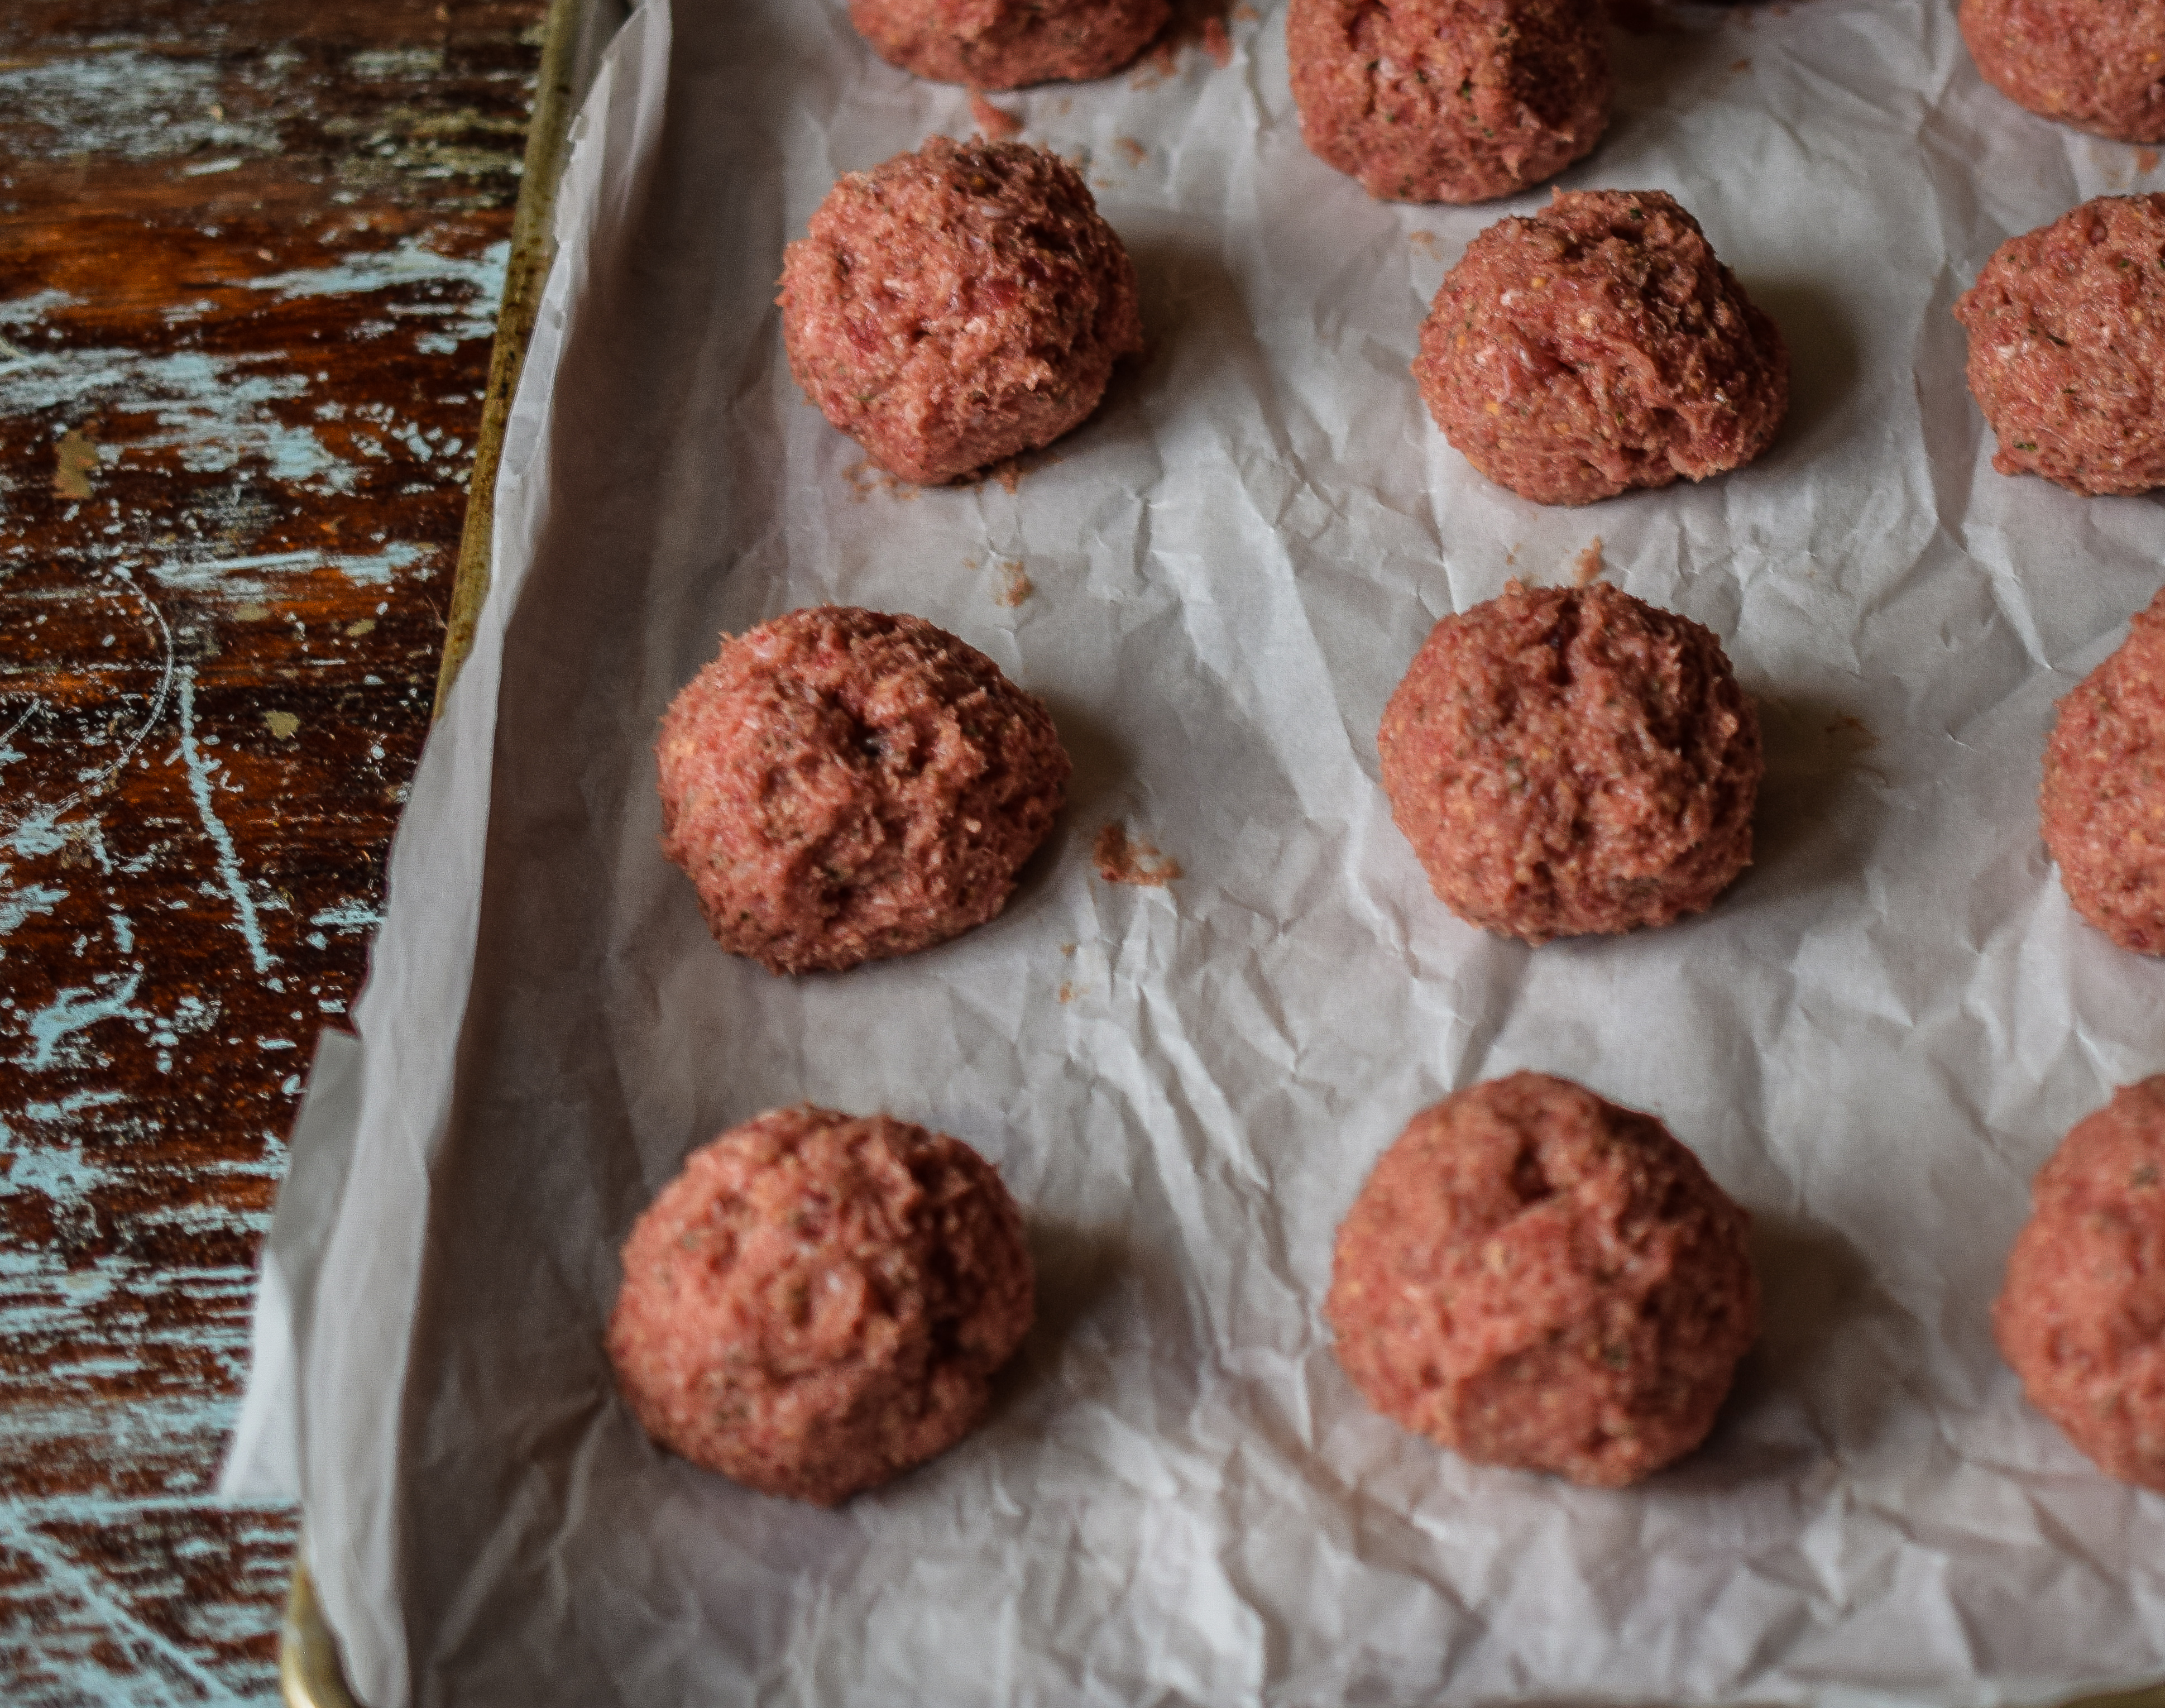 Uncooked meatballs on a baking sheet.